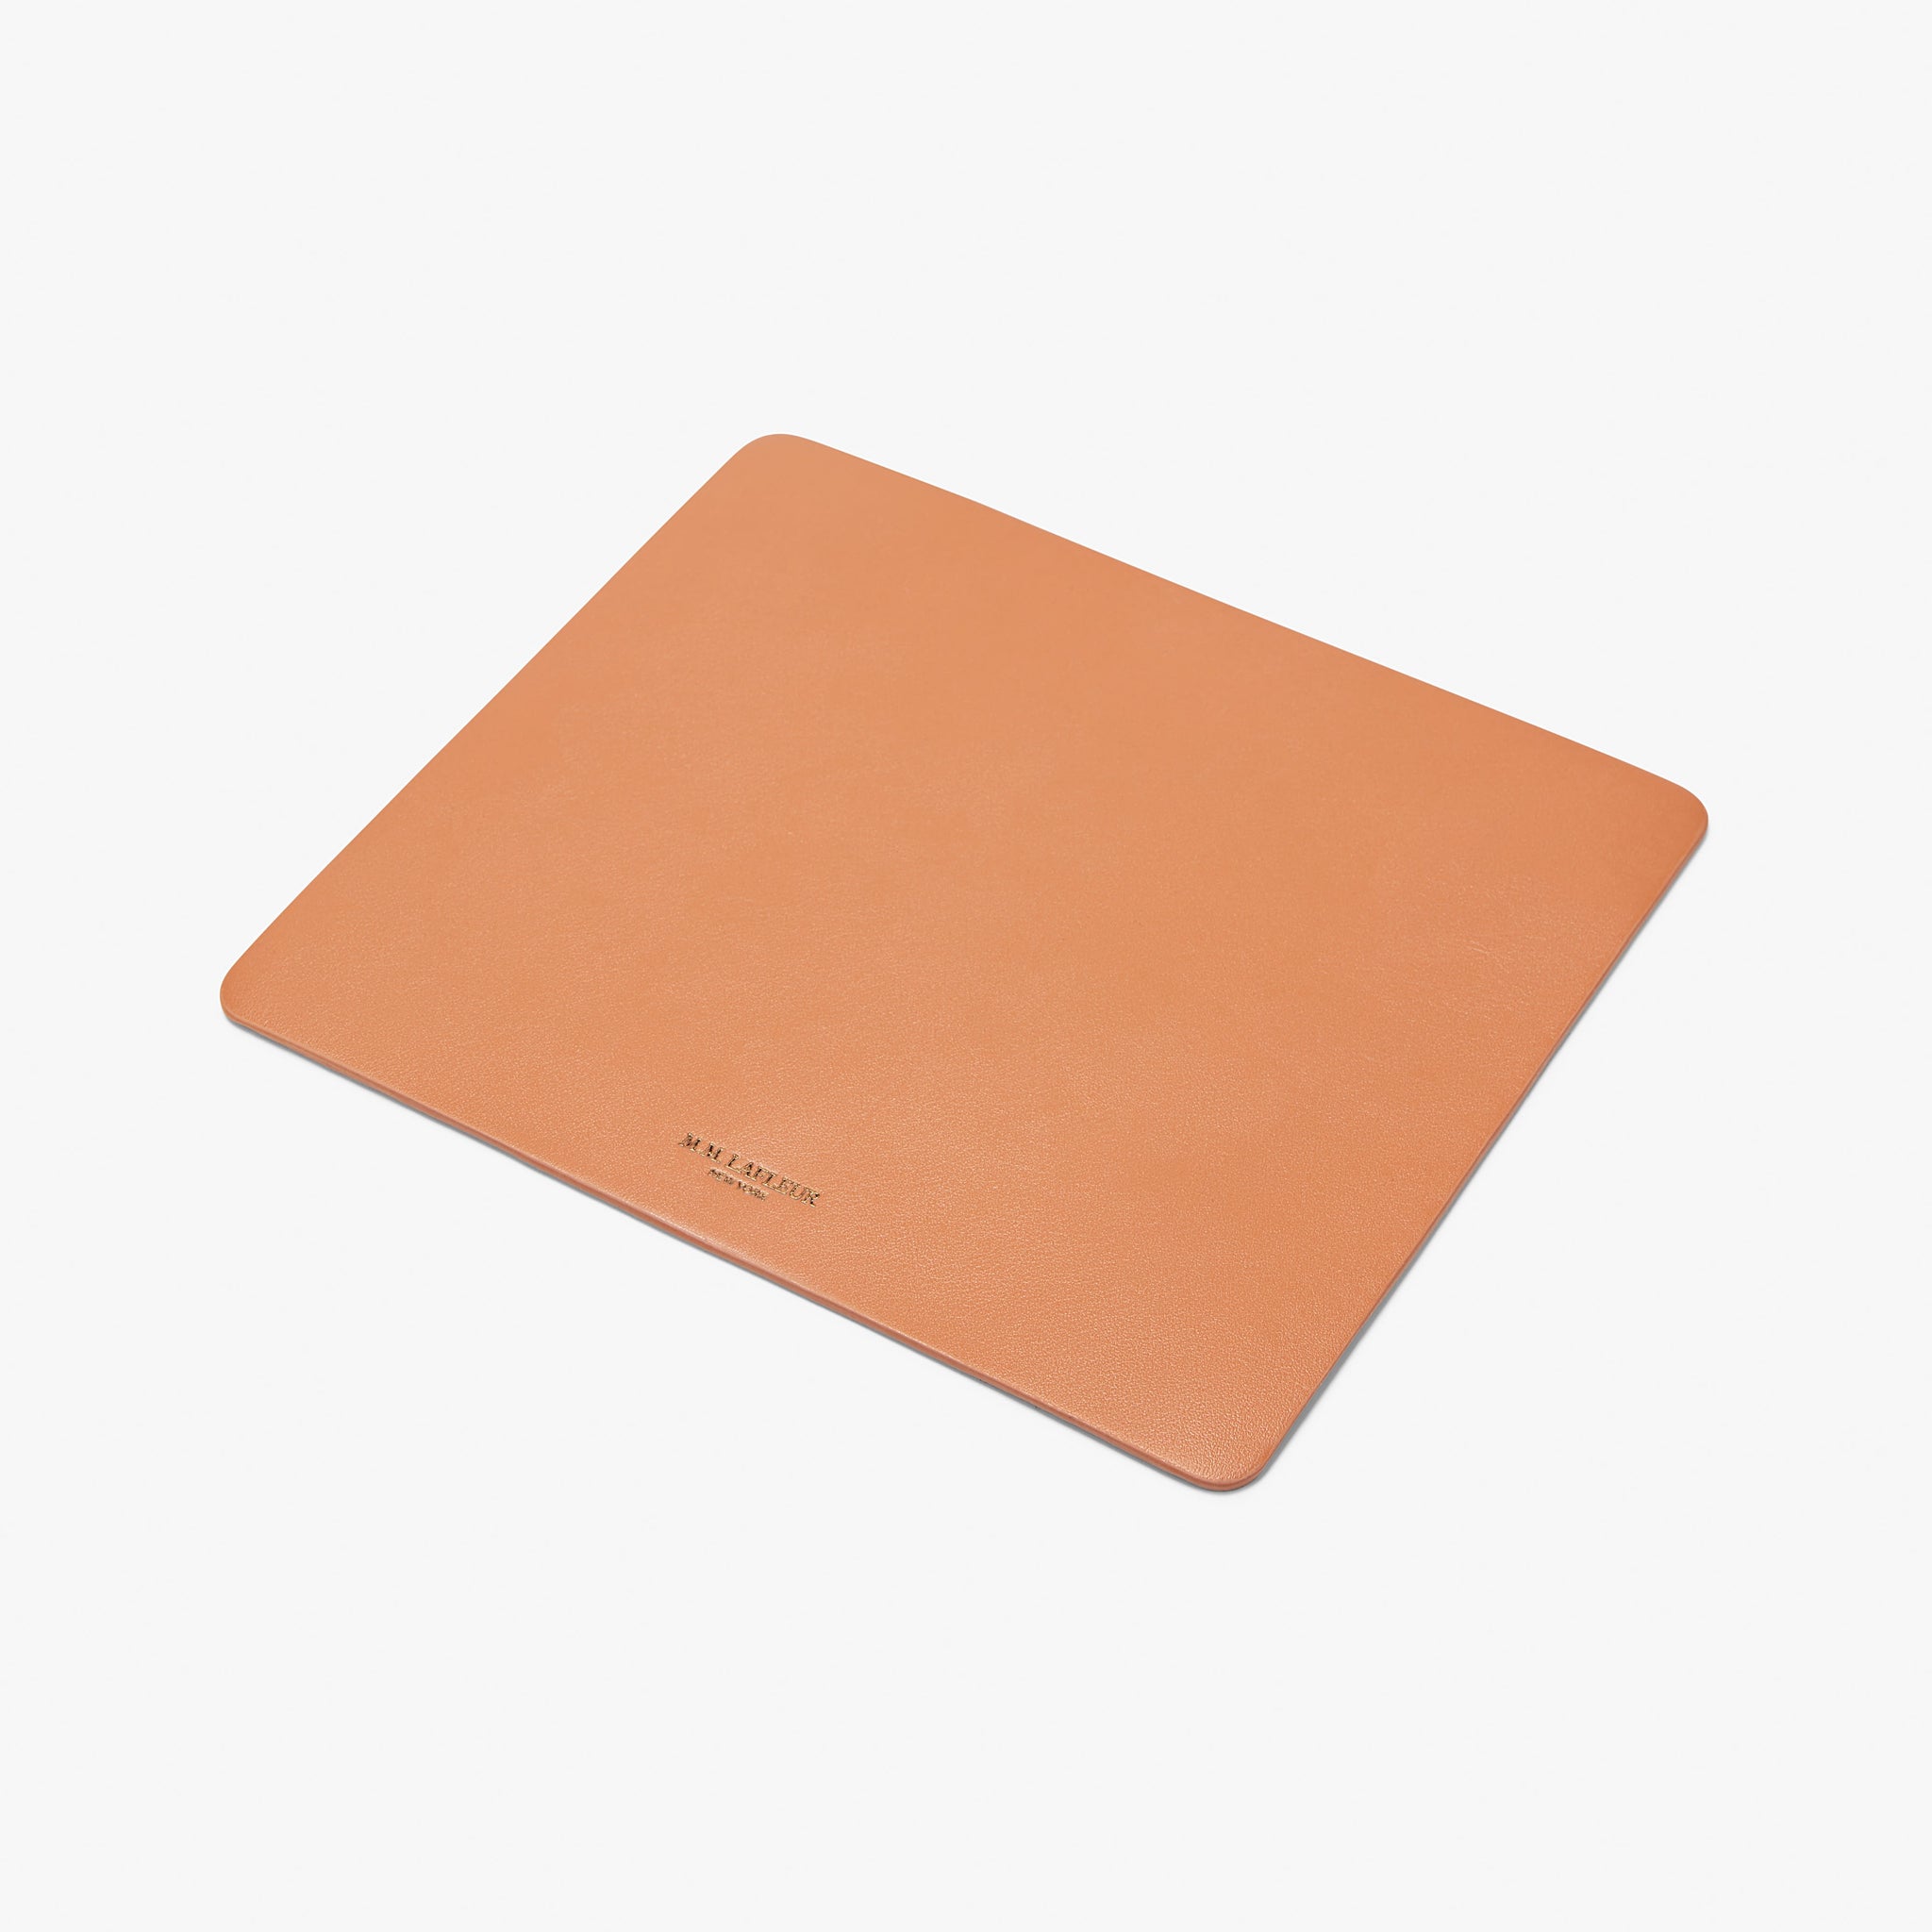 Mousepad—Leather in Caramel 